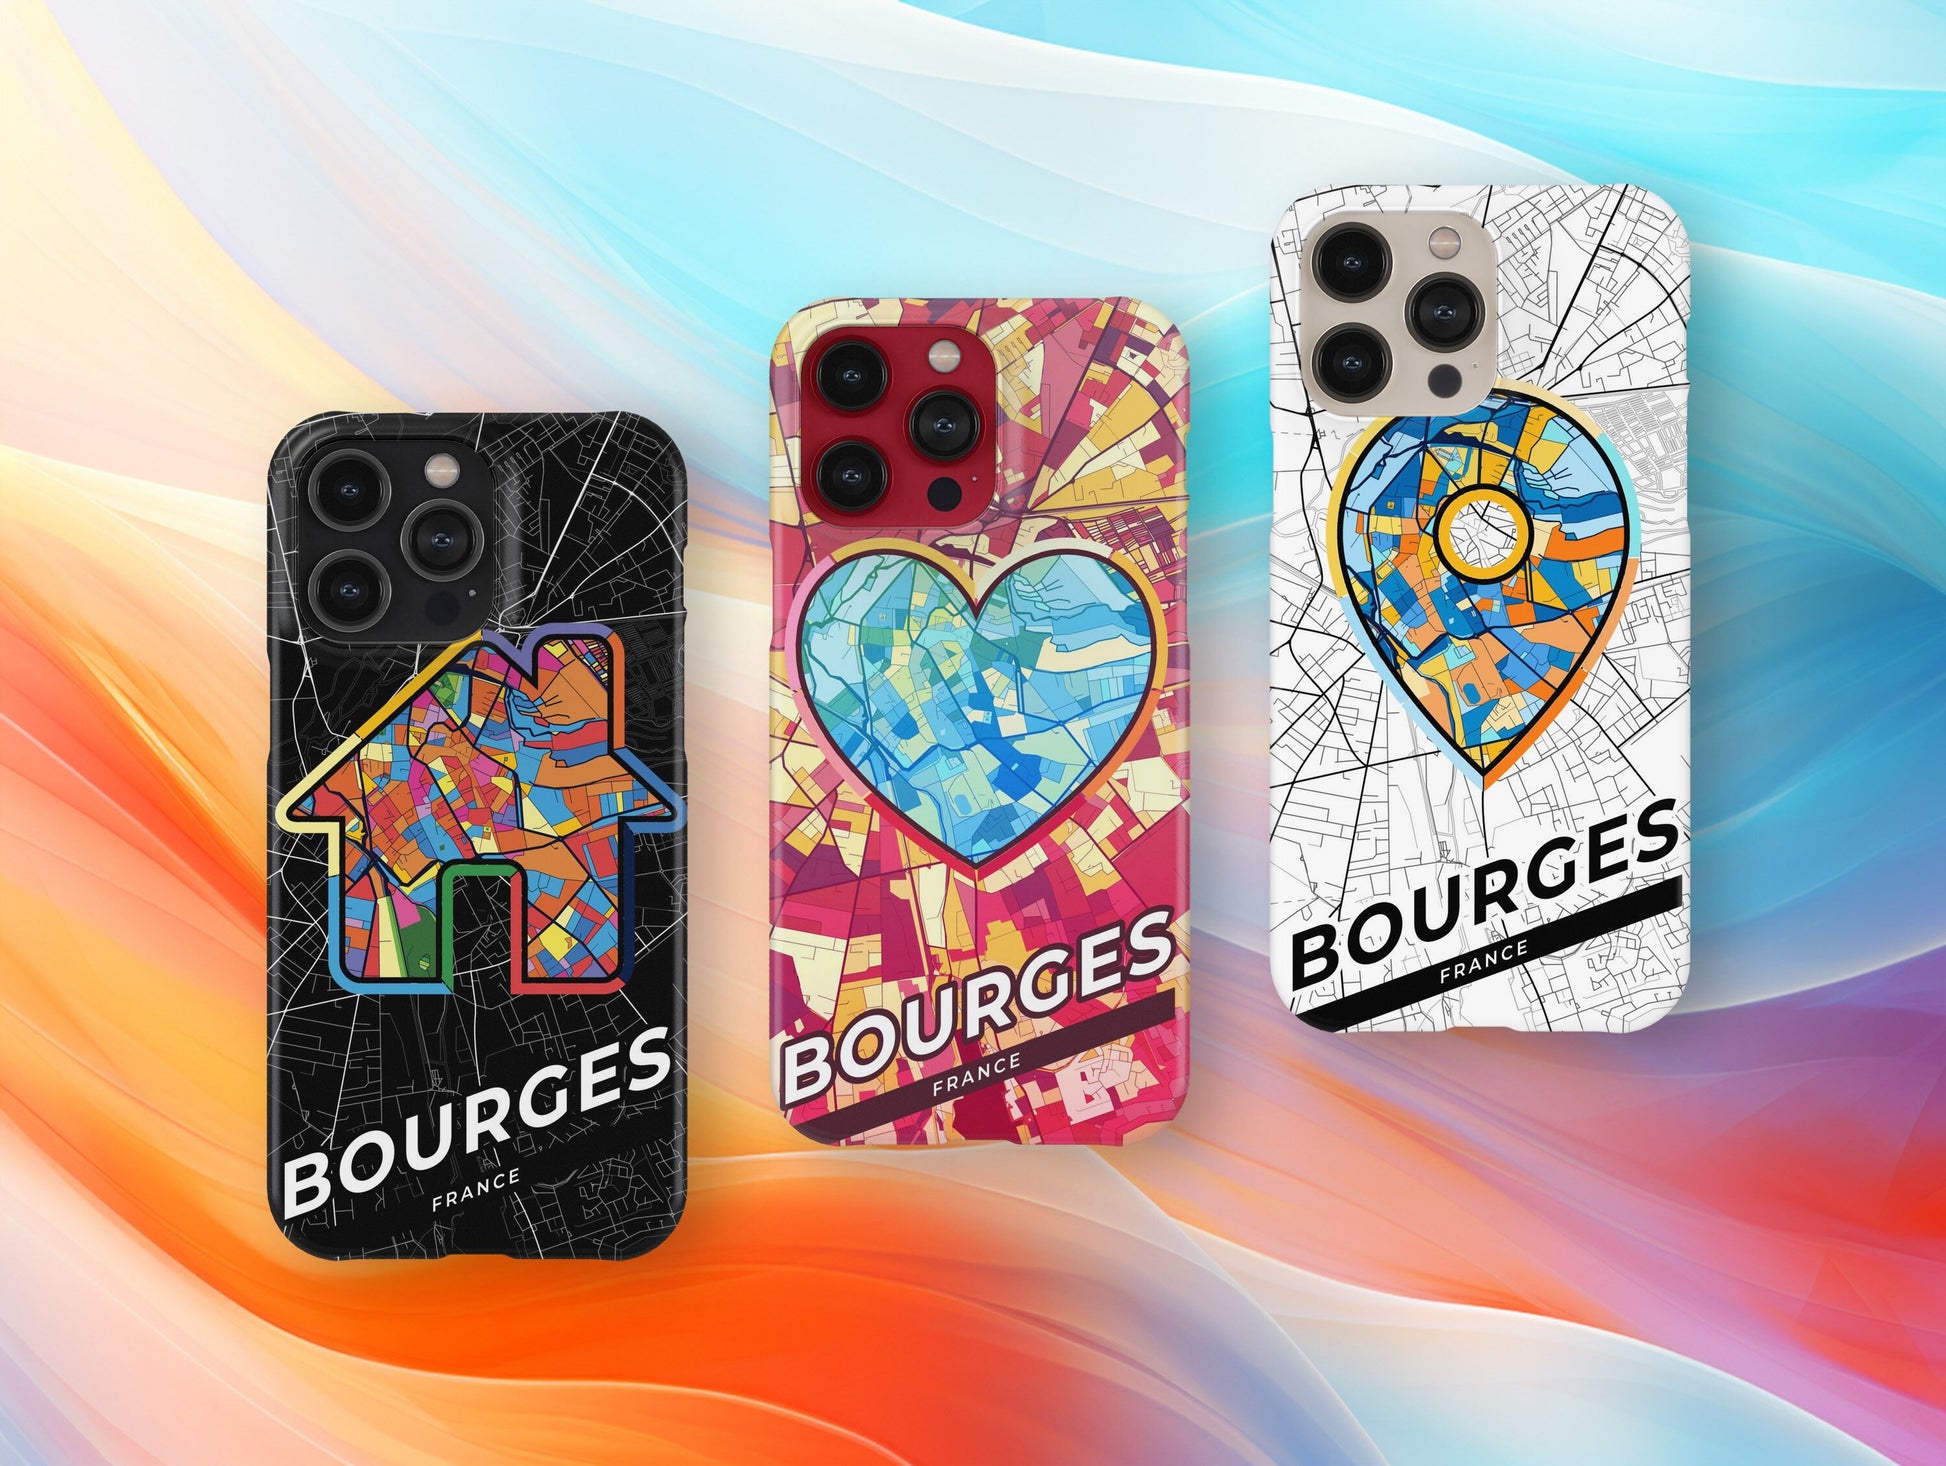 Bourges France slim phone case with colorful icon. Birthday, wedding or housewarming gift. Couple match cases.